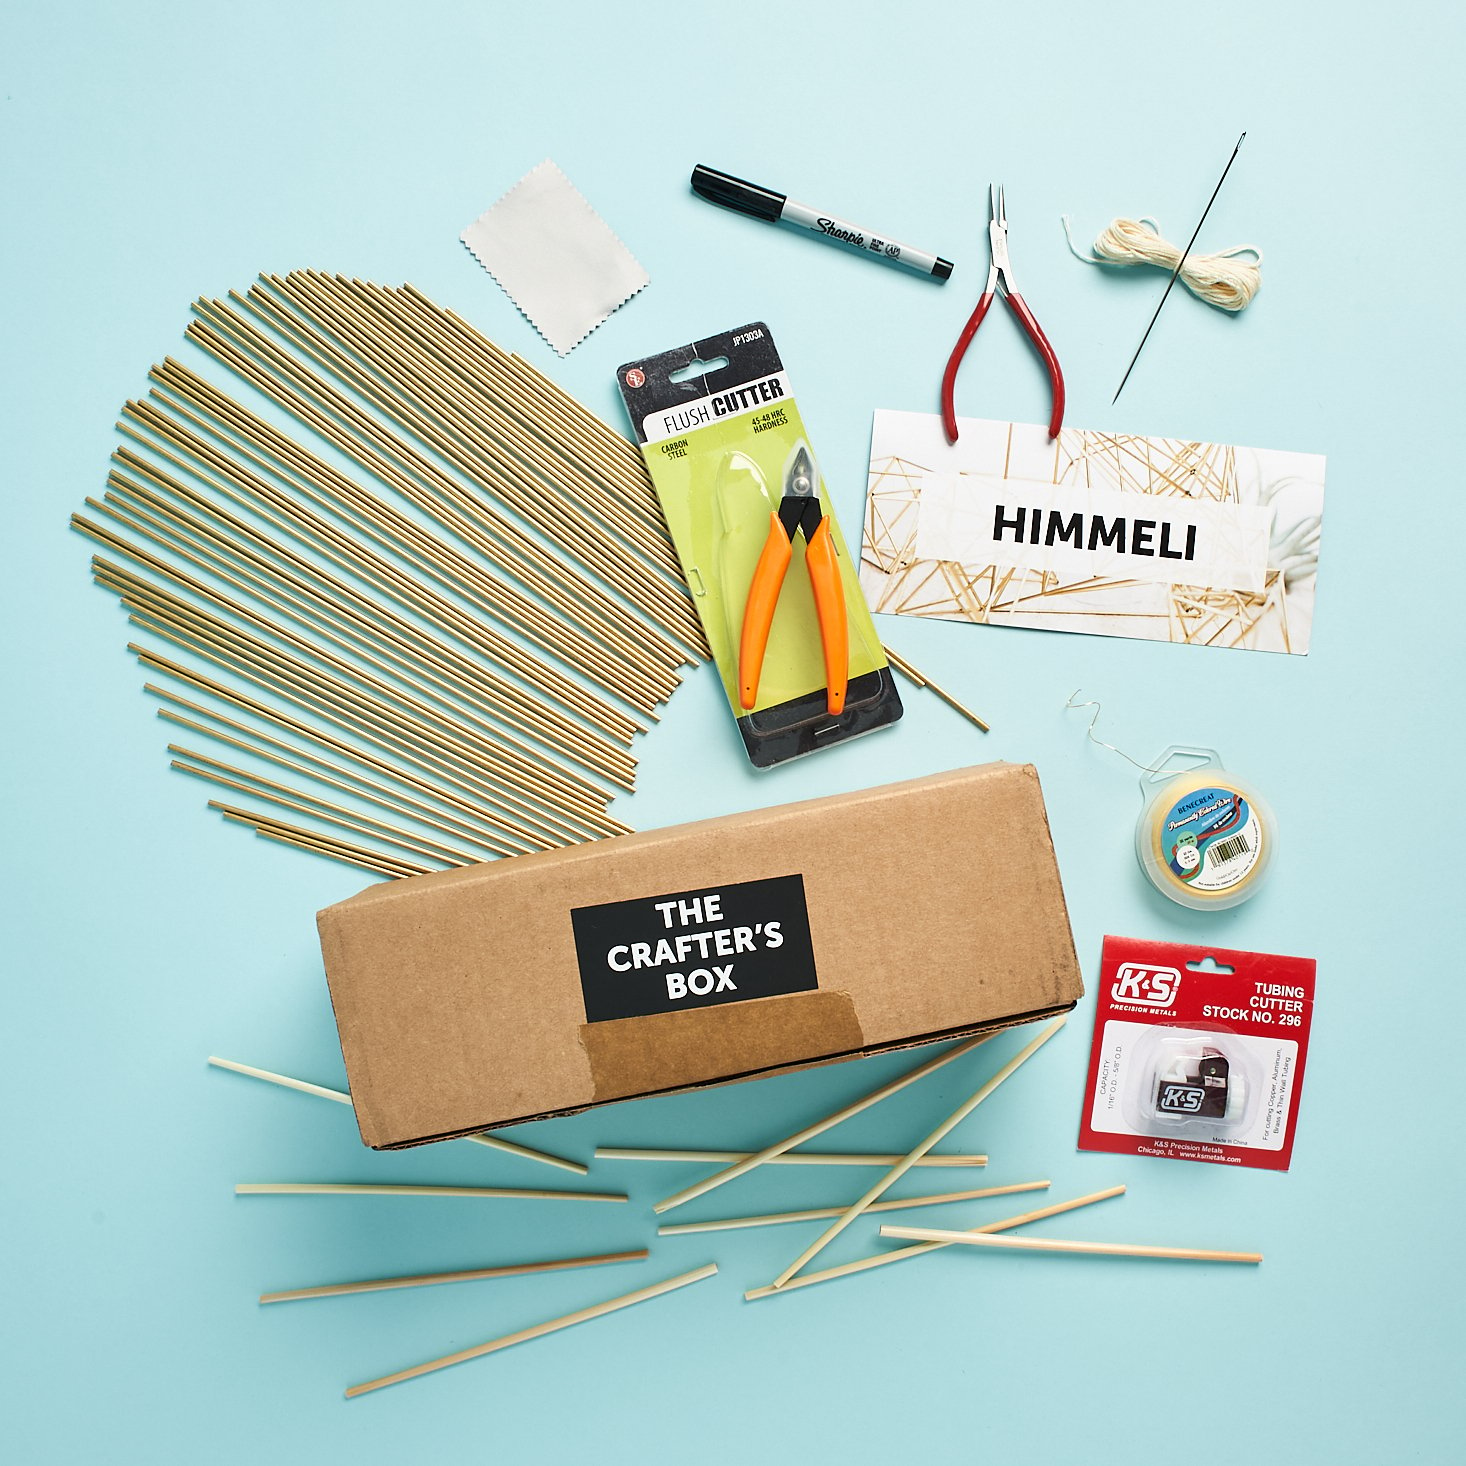 The Crafter’s Box ‘Himmeli’ Subscription Review – December 2020